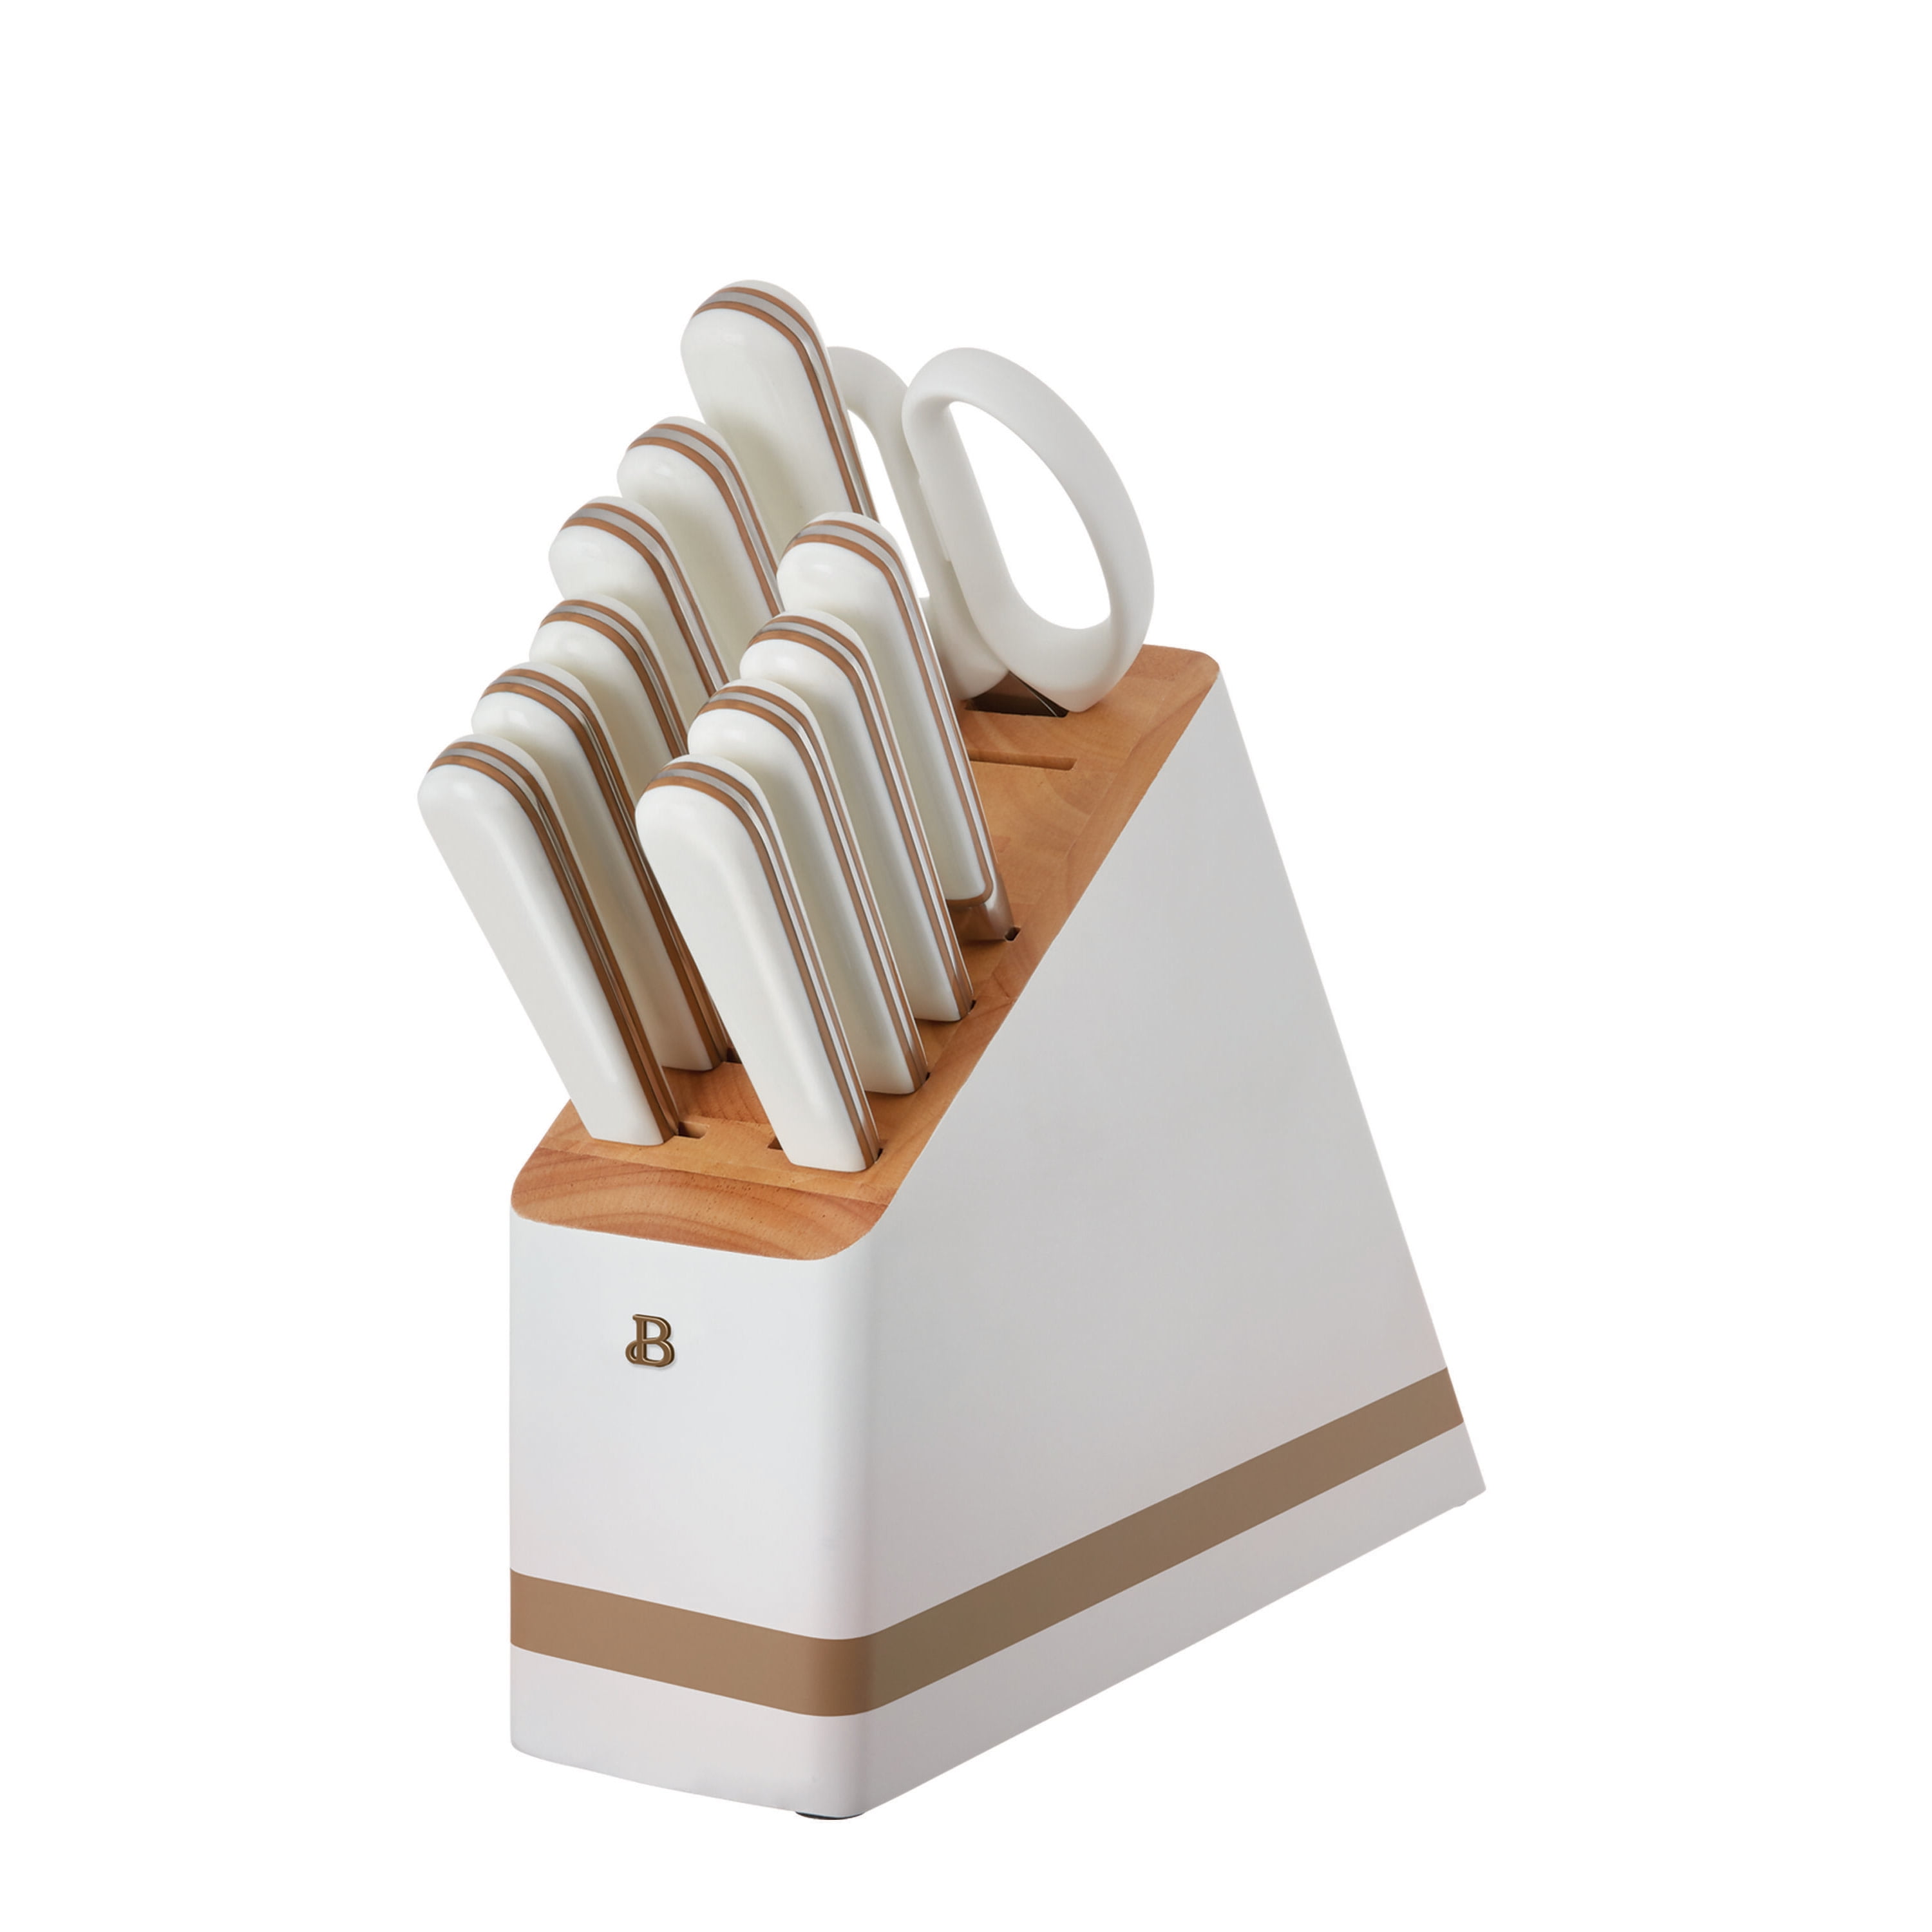 Beautiful 12-piece Forged Kitchen Knife Set in White with Wood Storage Block, by Drew Barrymore - Walmart.com